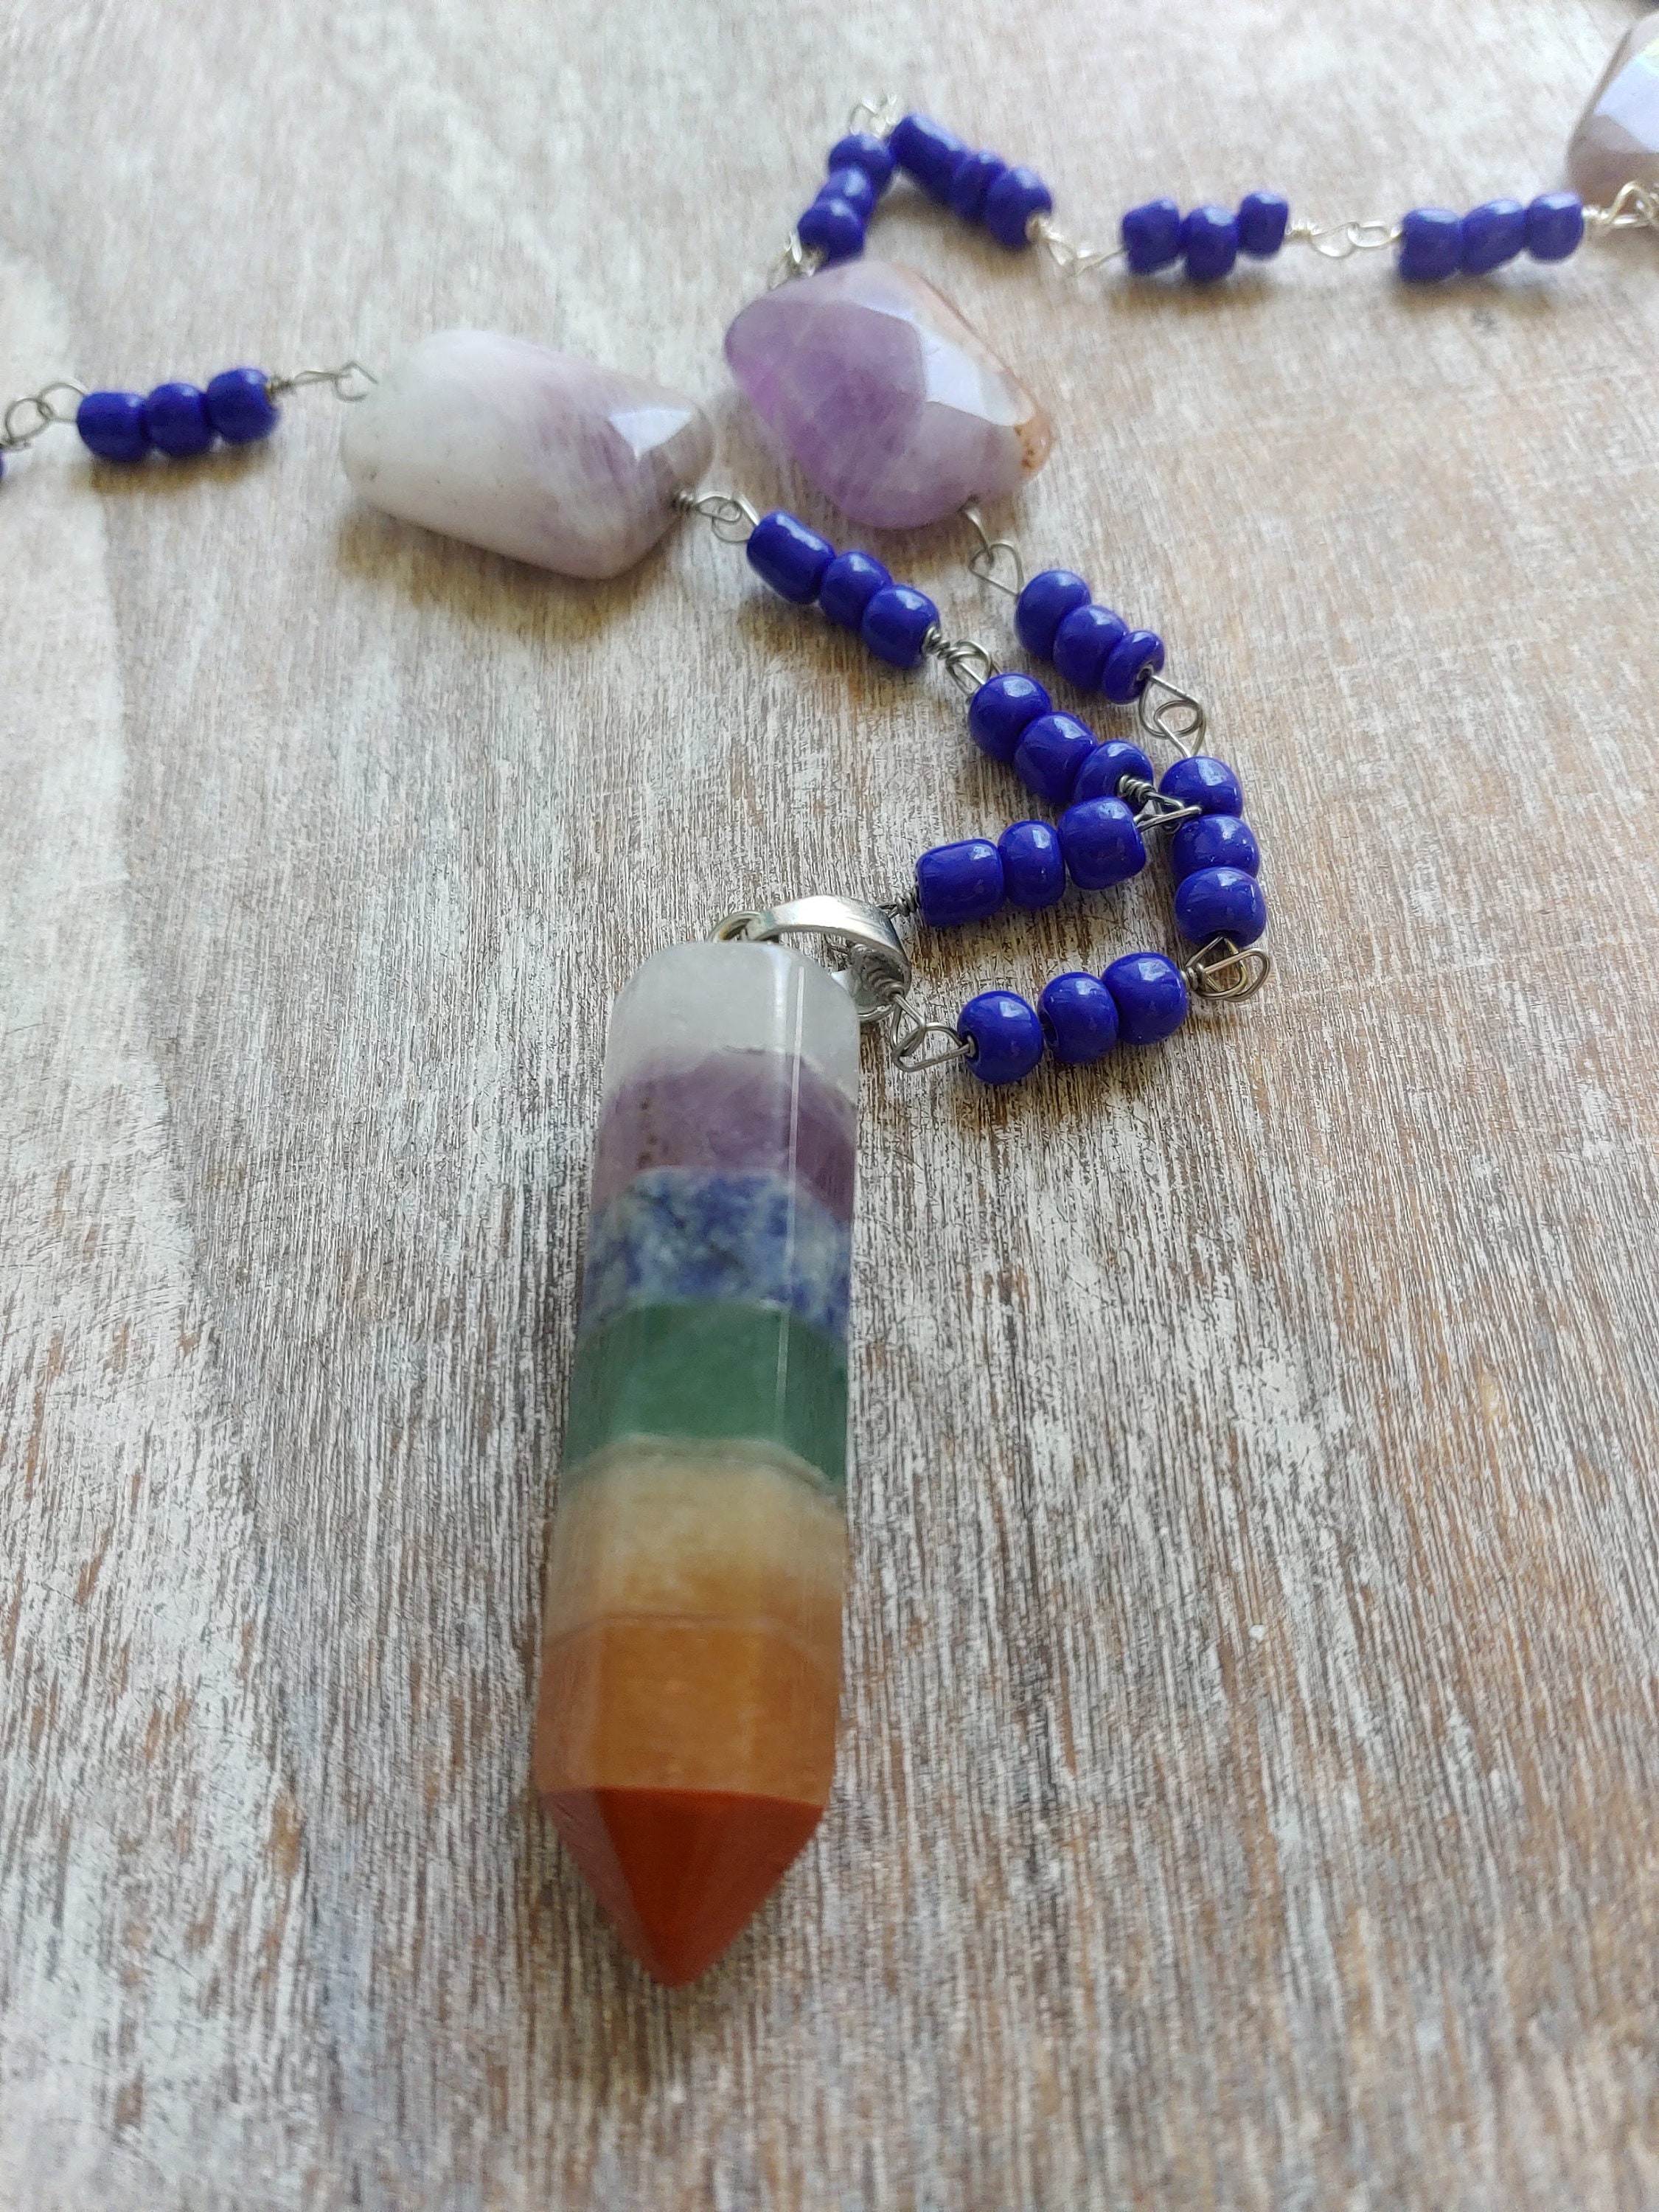 Rainbow arrow pendant necklace with amethyst and blue glass beading